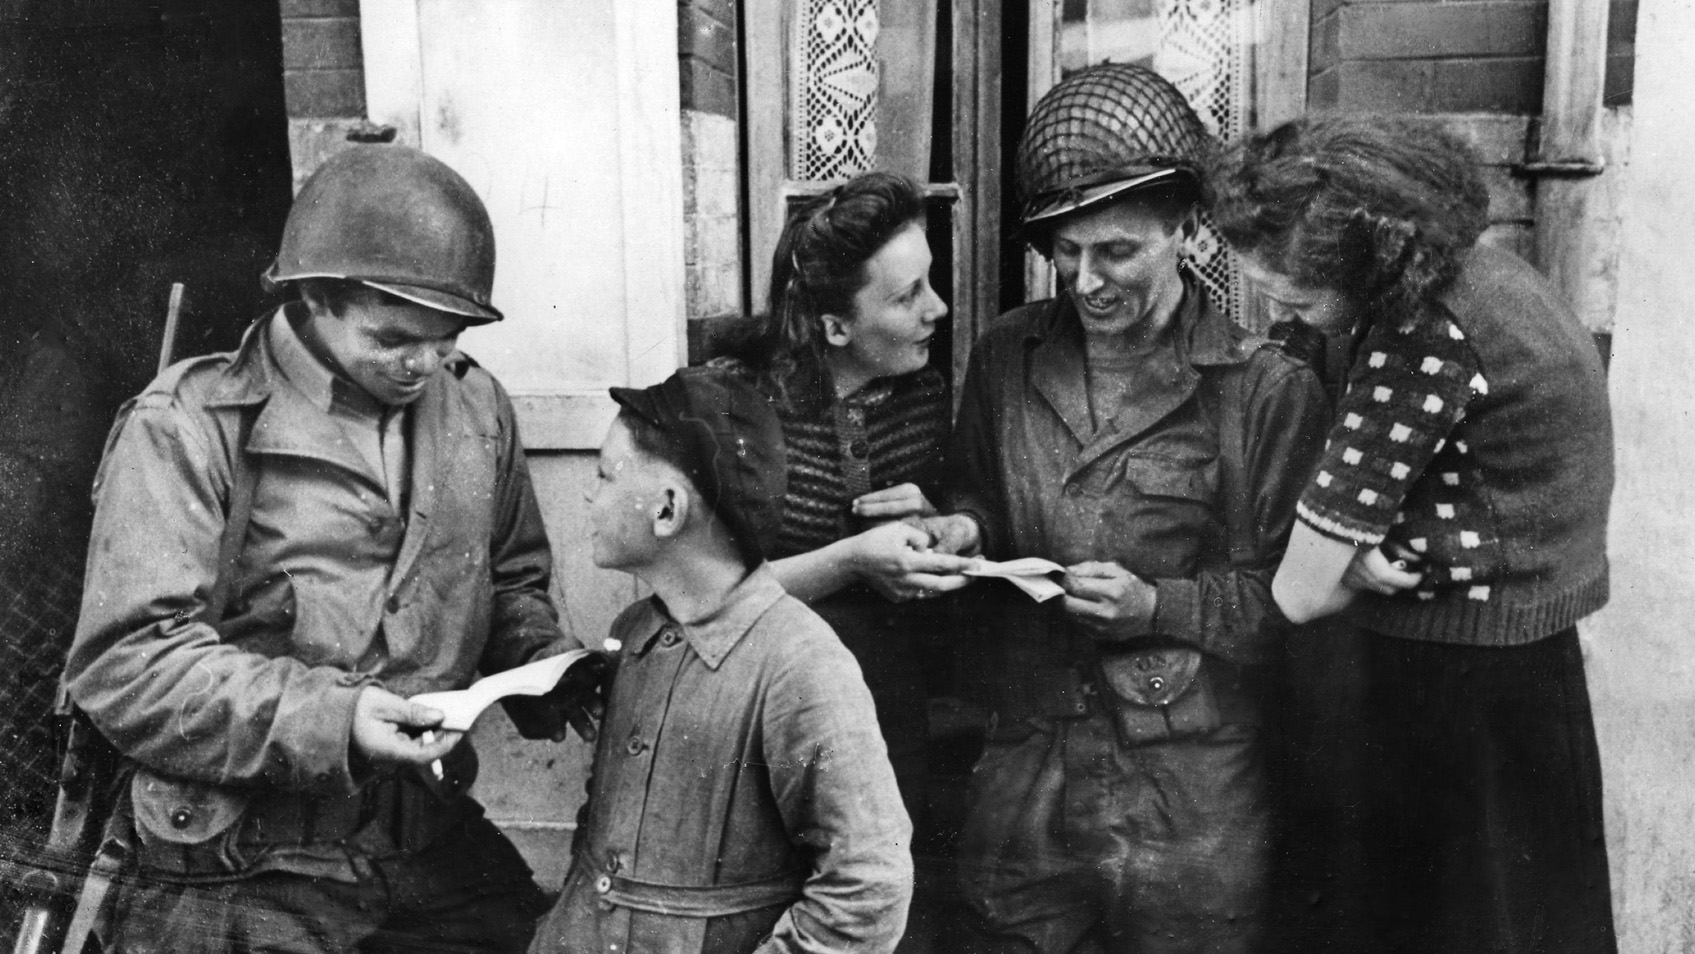 In Isigny, two French women and a boy help American soldiers read French.